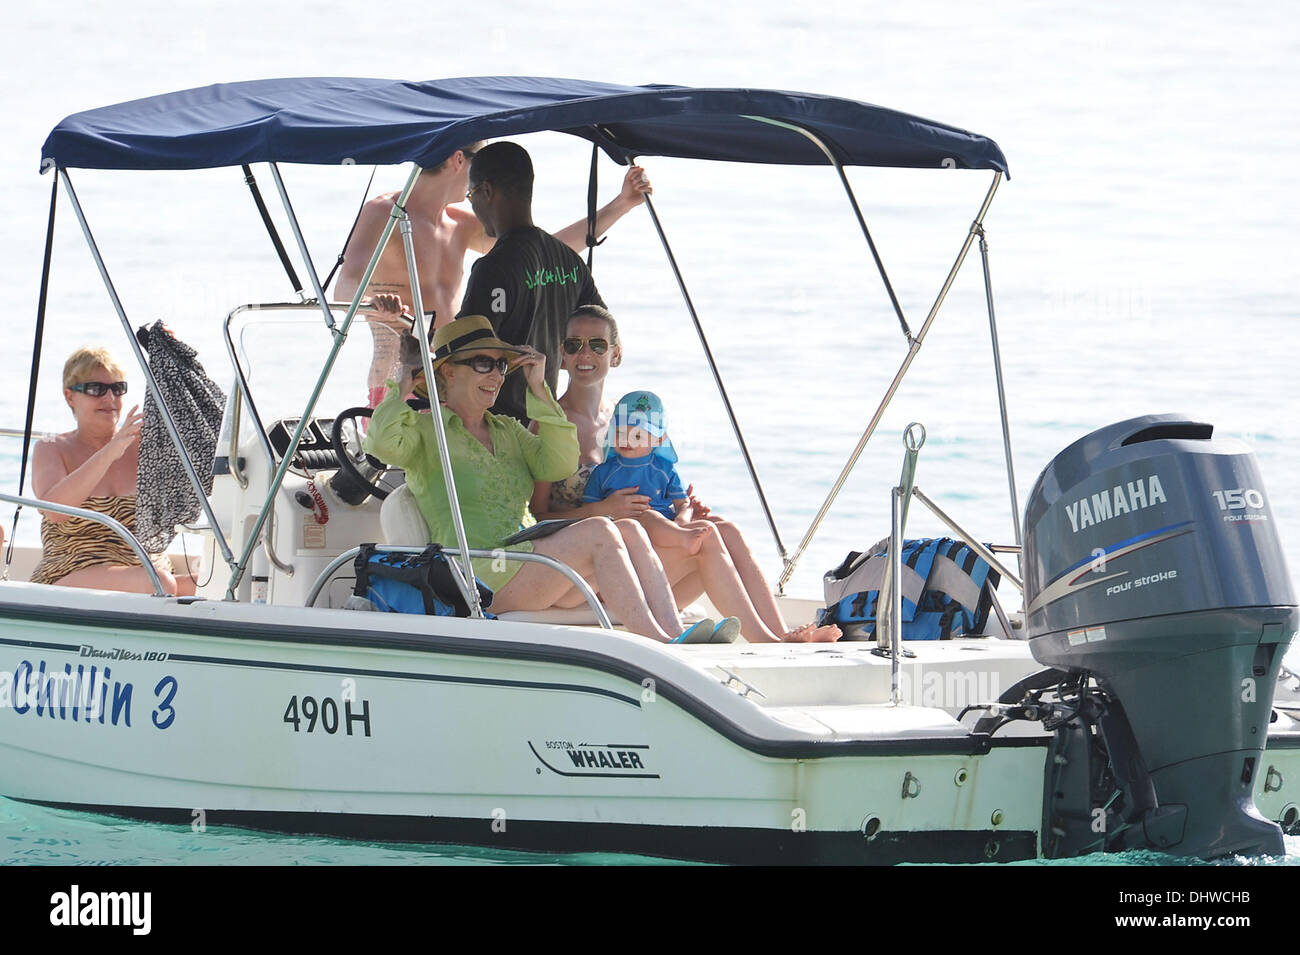 Manchester United midfielder, Michael Carrick on a boat trip with wife Lisa who holds her son Jacey while on holiday in Barbados. Barbados - 28.05.12 Stock Photo